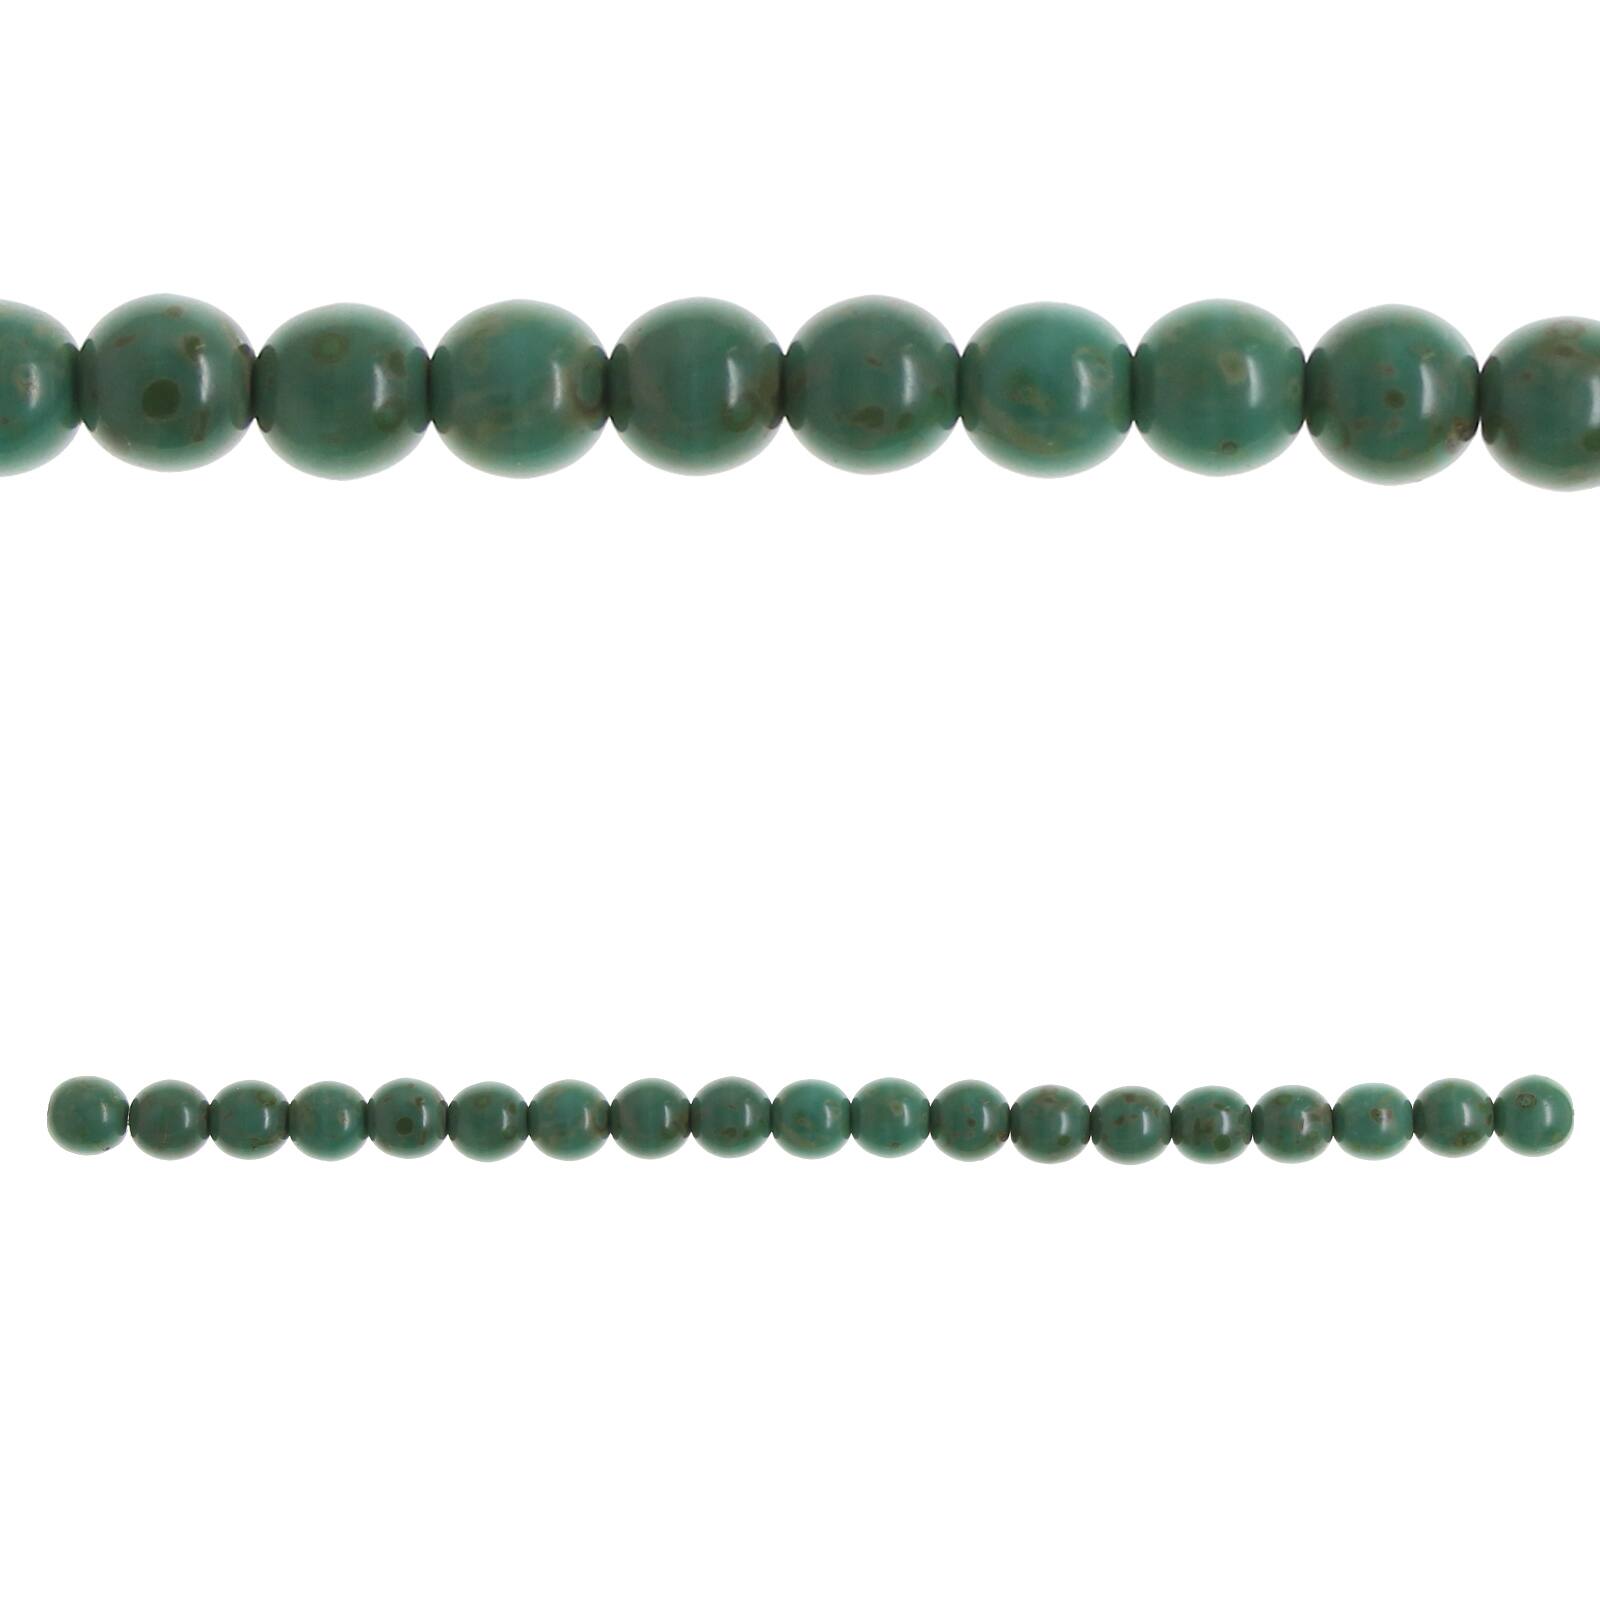 Bead Gallery® Turquoise Czech Glass Round Beads, 8mm